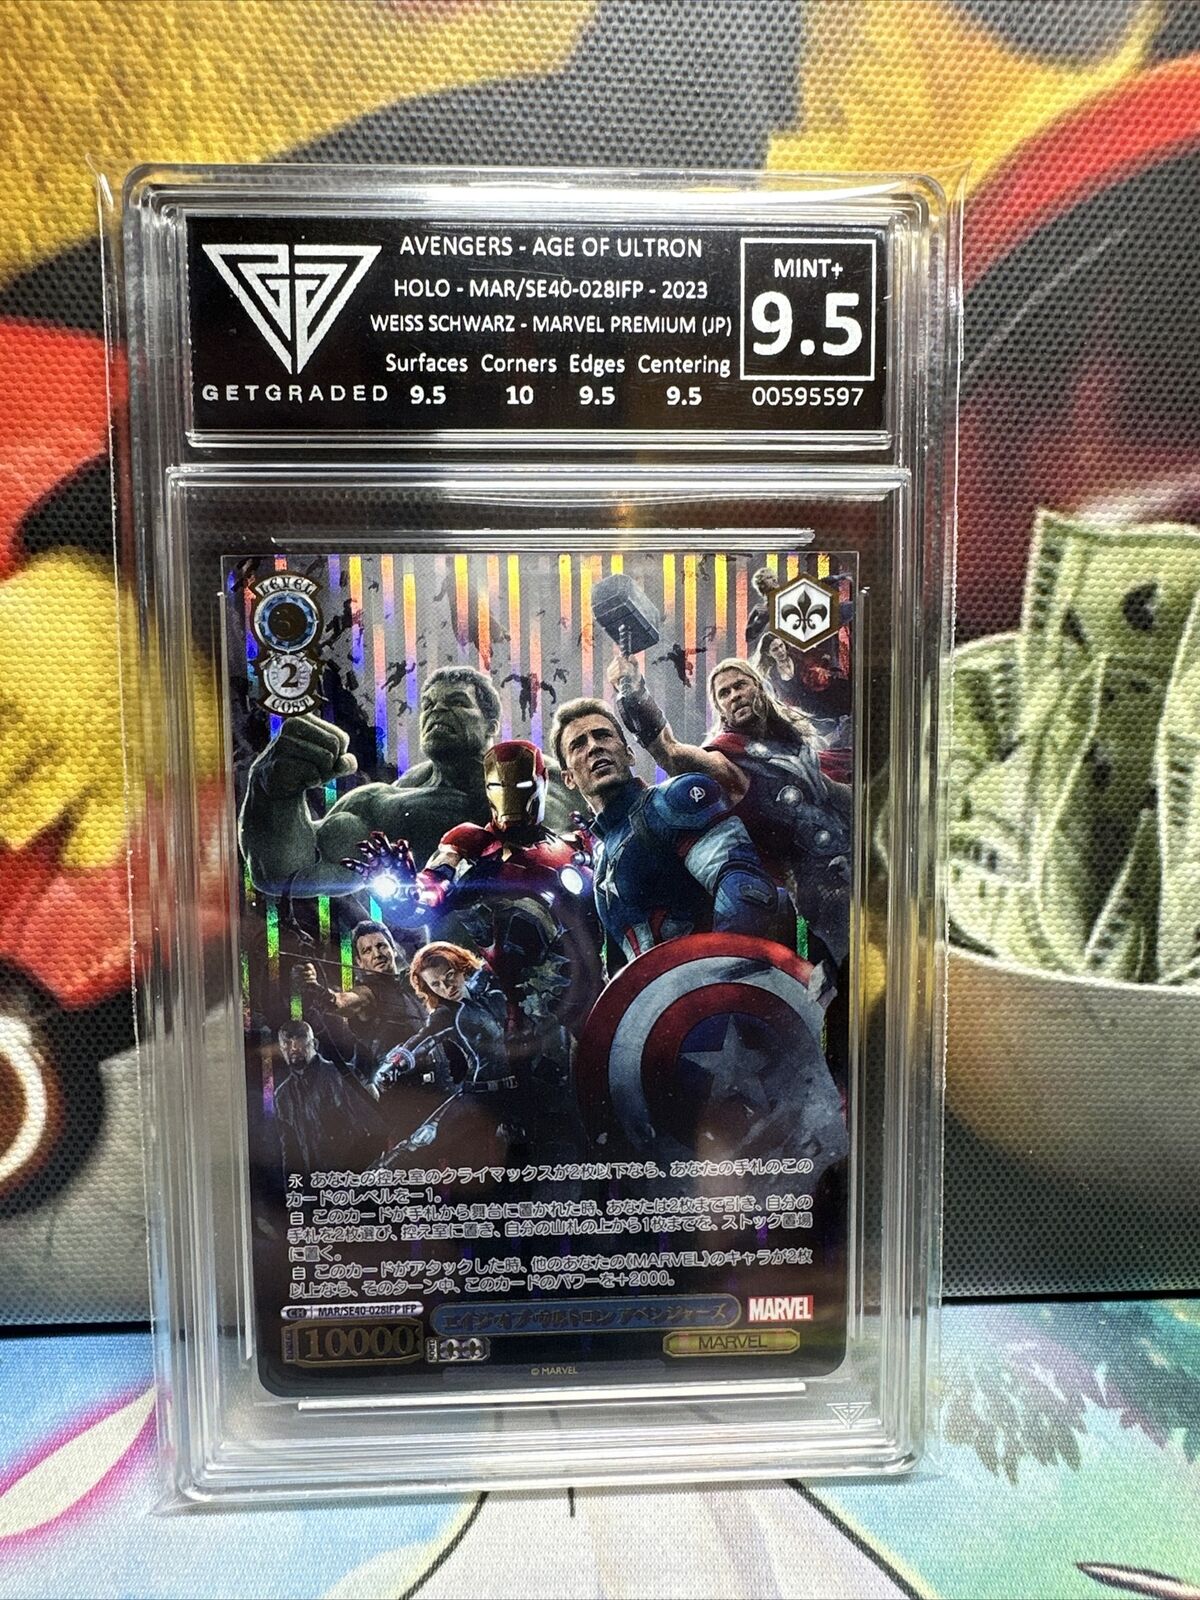 Avengers Age Of Ultron 028IFP Weiss Schwarz Marvel GetGraded 9.5 Not PSA BGS